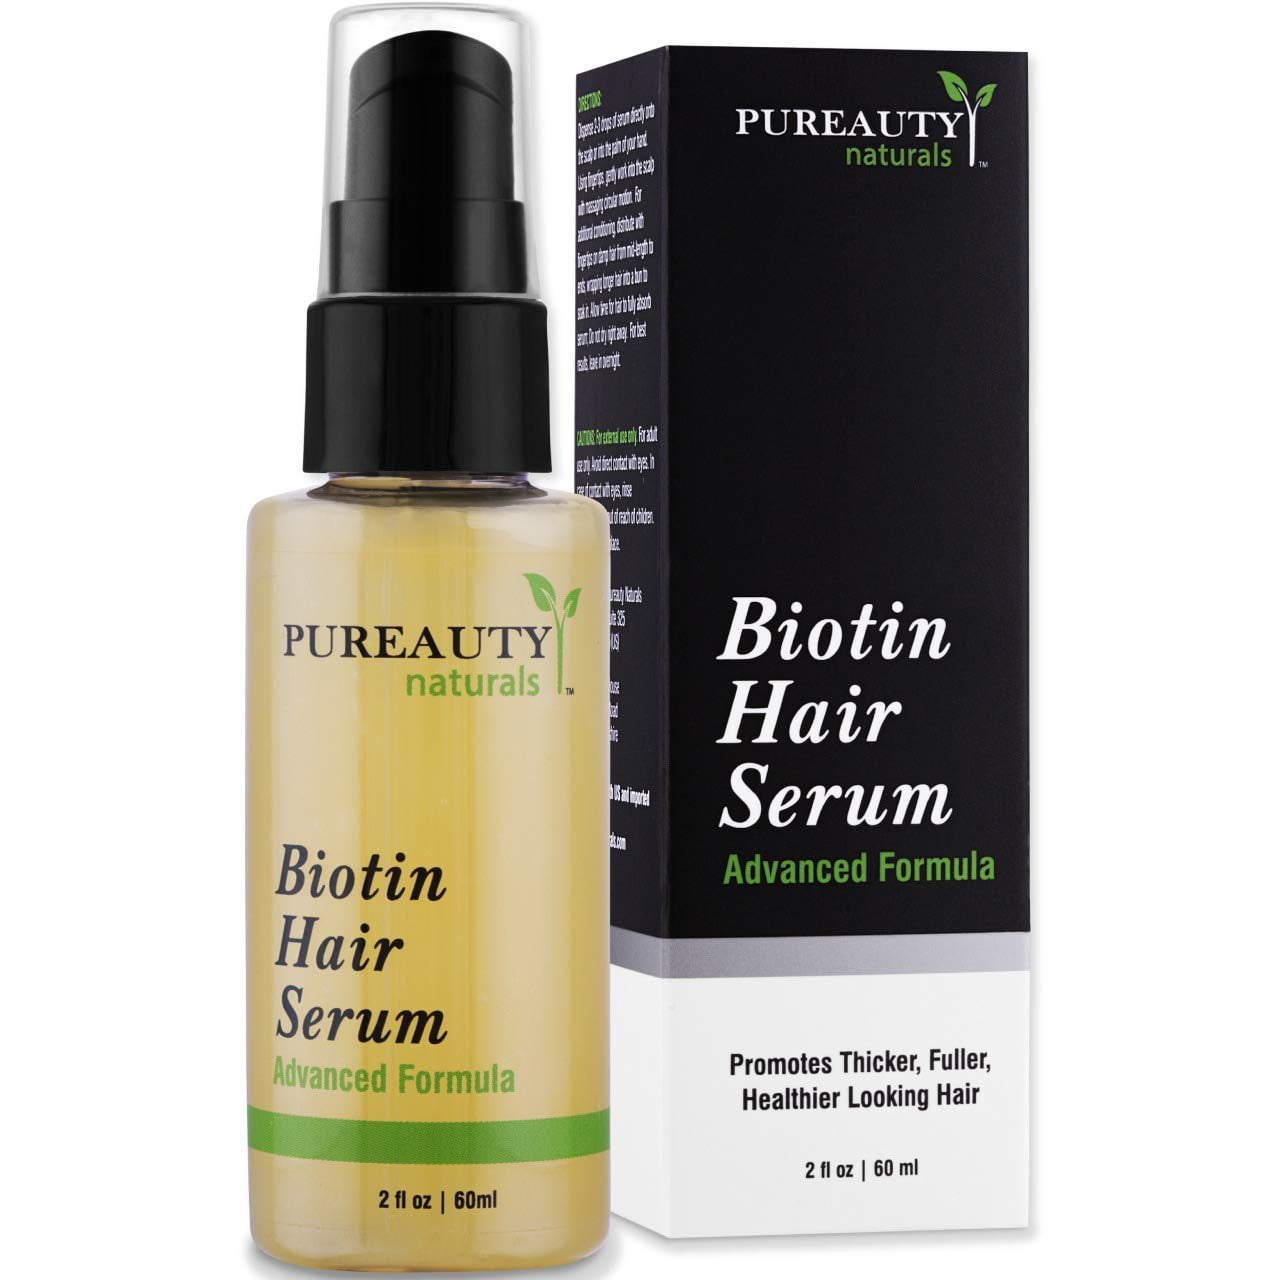 Biotin Hair Growth Serum By Pureauty Naturals Advanced Topical Formula To Help Grow Healthy Strong Hair Suitable For Men Women Of All Hair Types Hair Loss Support